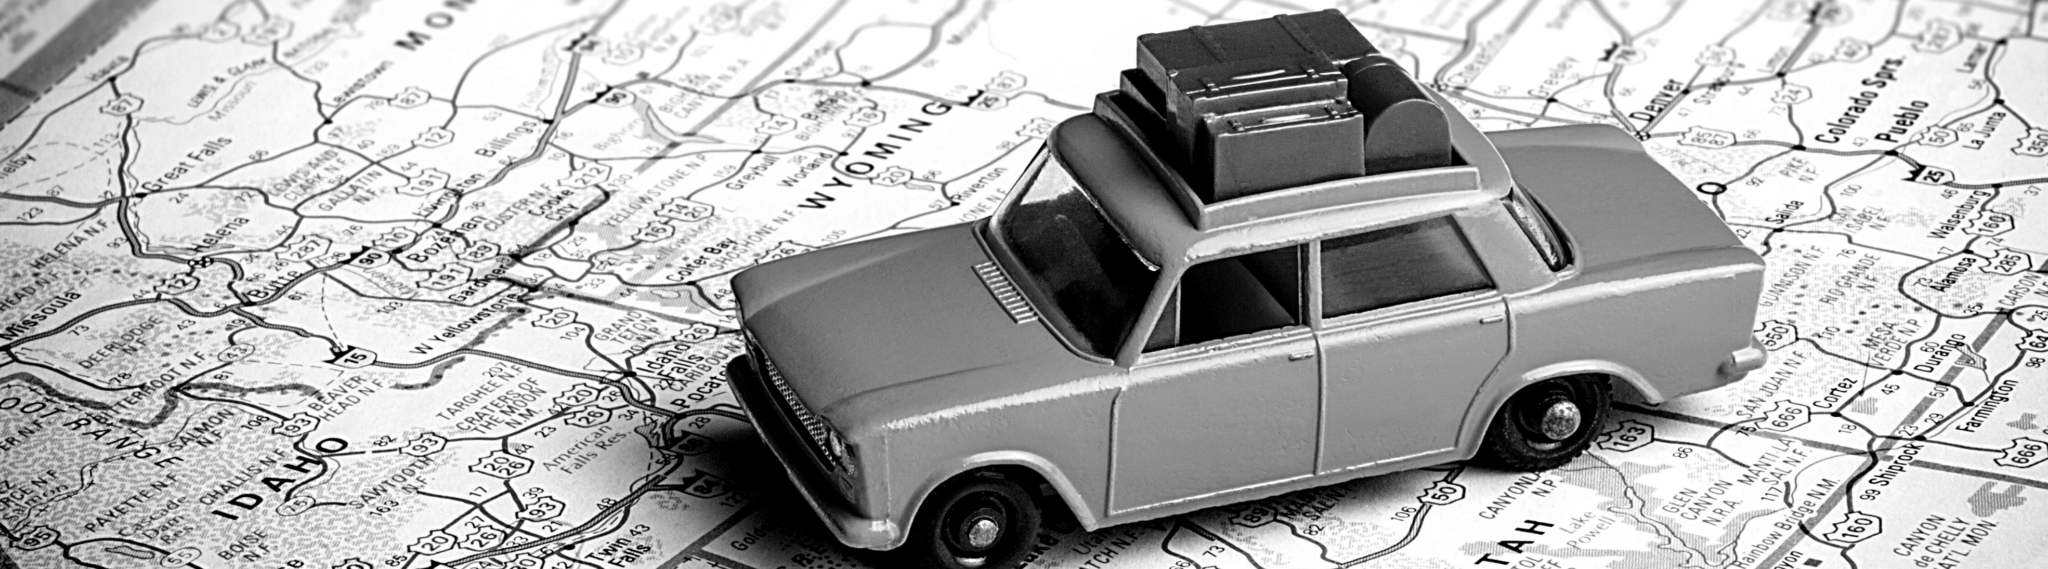 image shows a 1950's style car on a paper map, as a symbol for a software roadmap